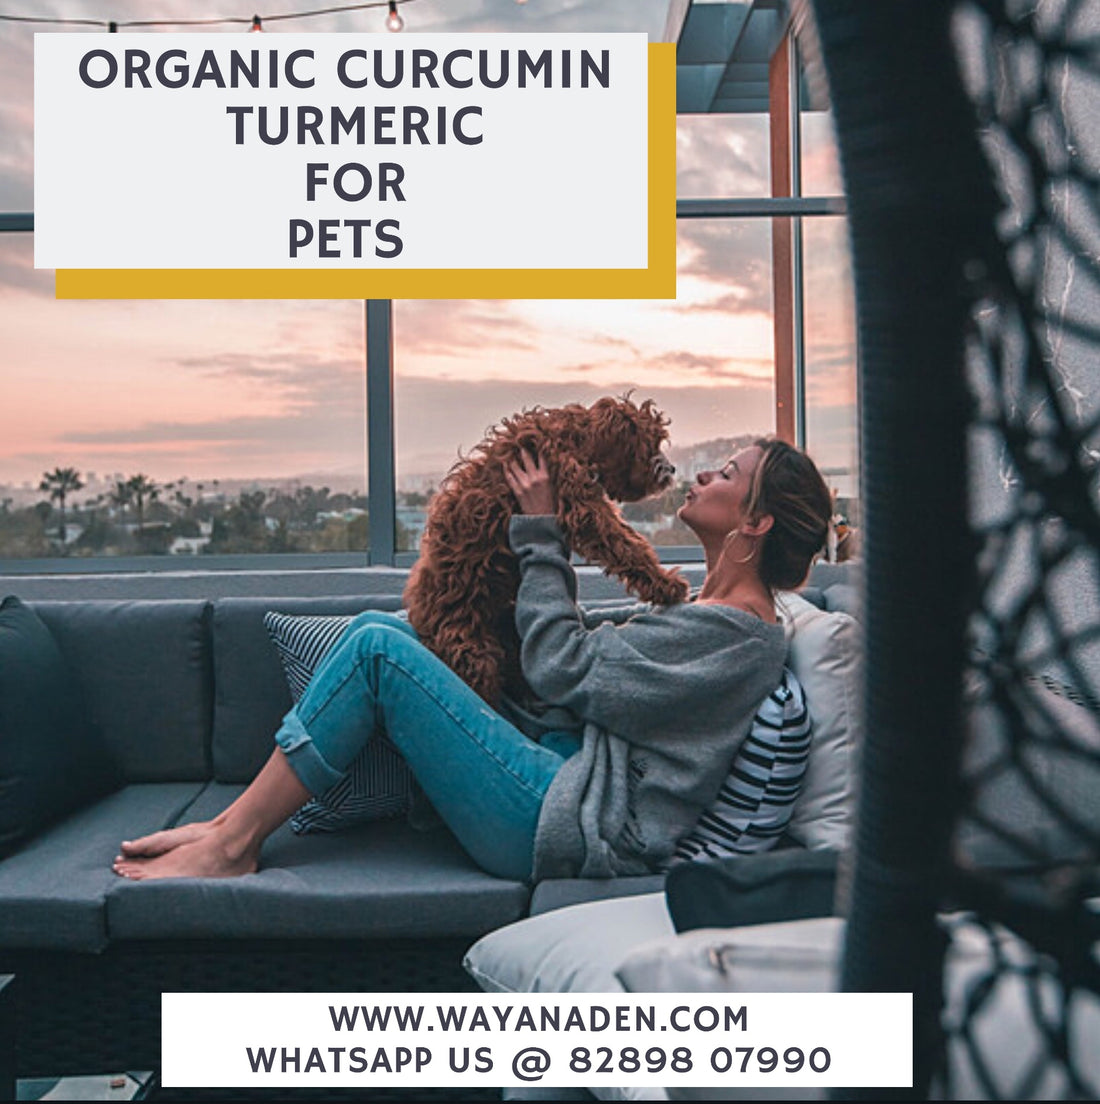 Organic Curcumin Turmeric For Dogs and other animals WWW.WAYANADEN.COM